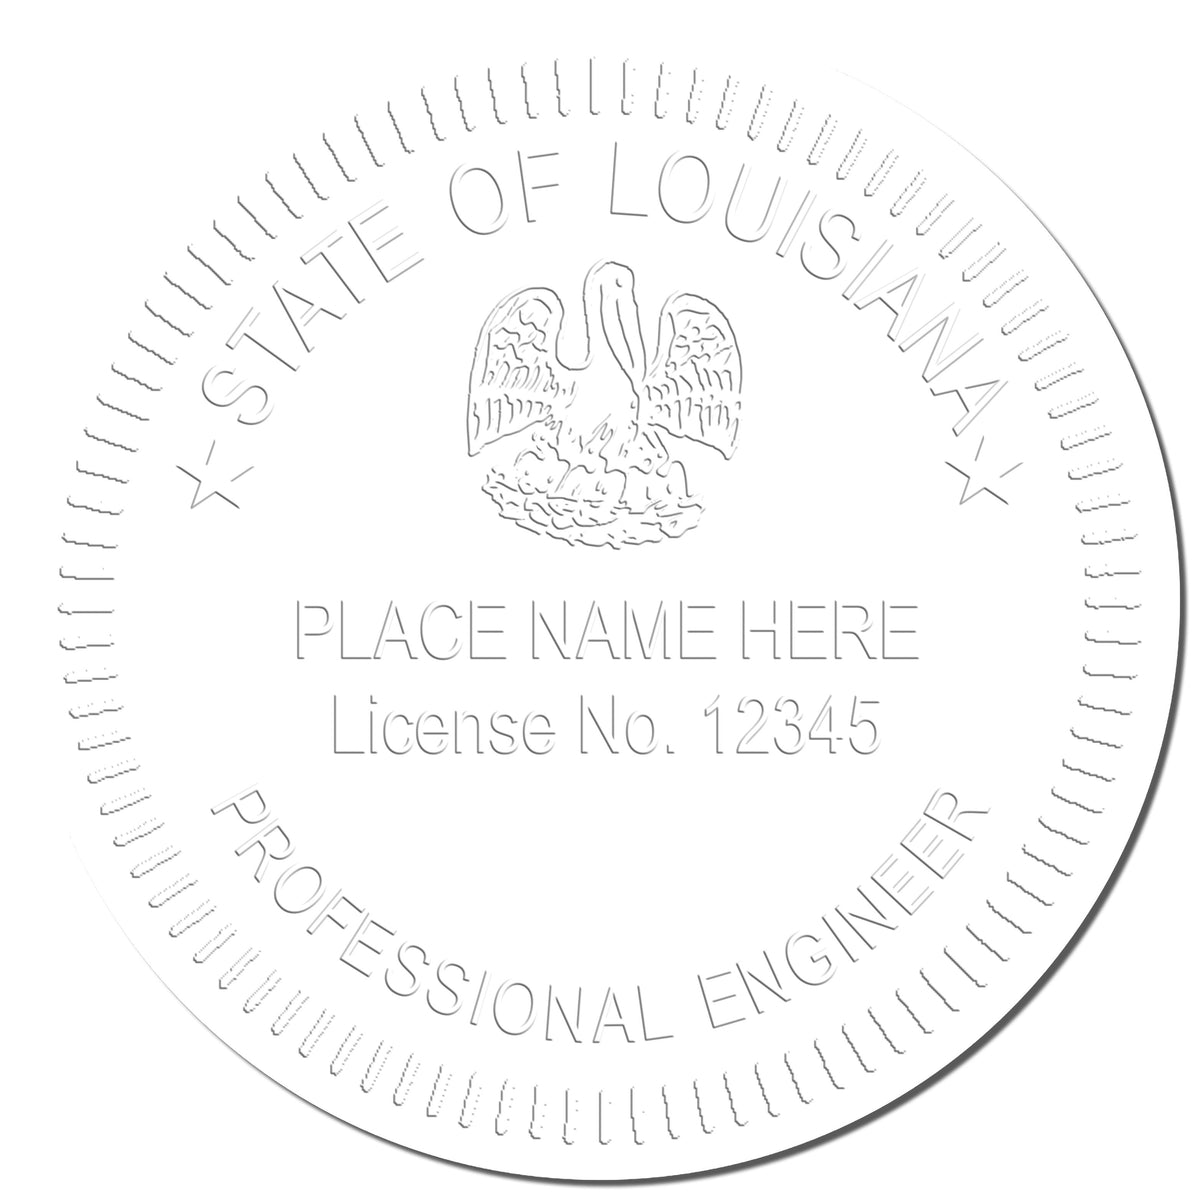 This paper is stamped with a sample imprint of the Hybrid Louisiana Engineer Seal, signifying its quality and reliability.